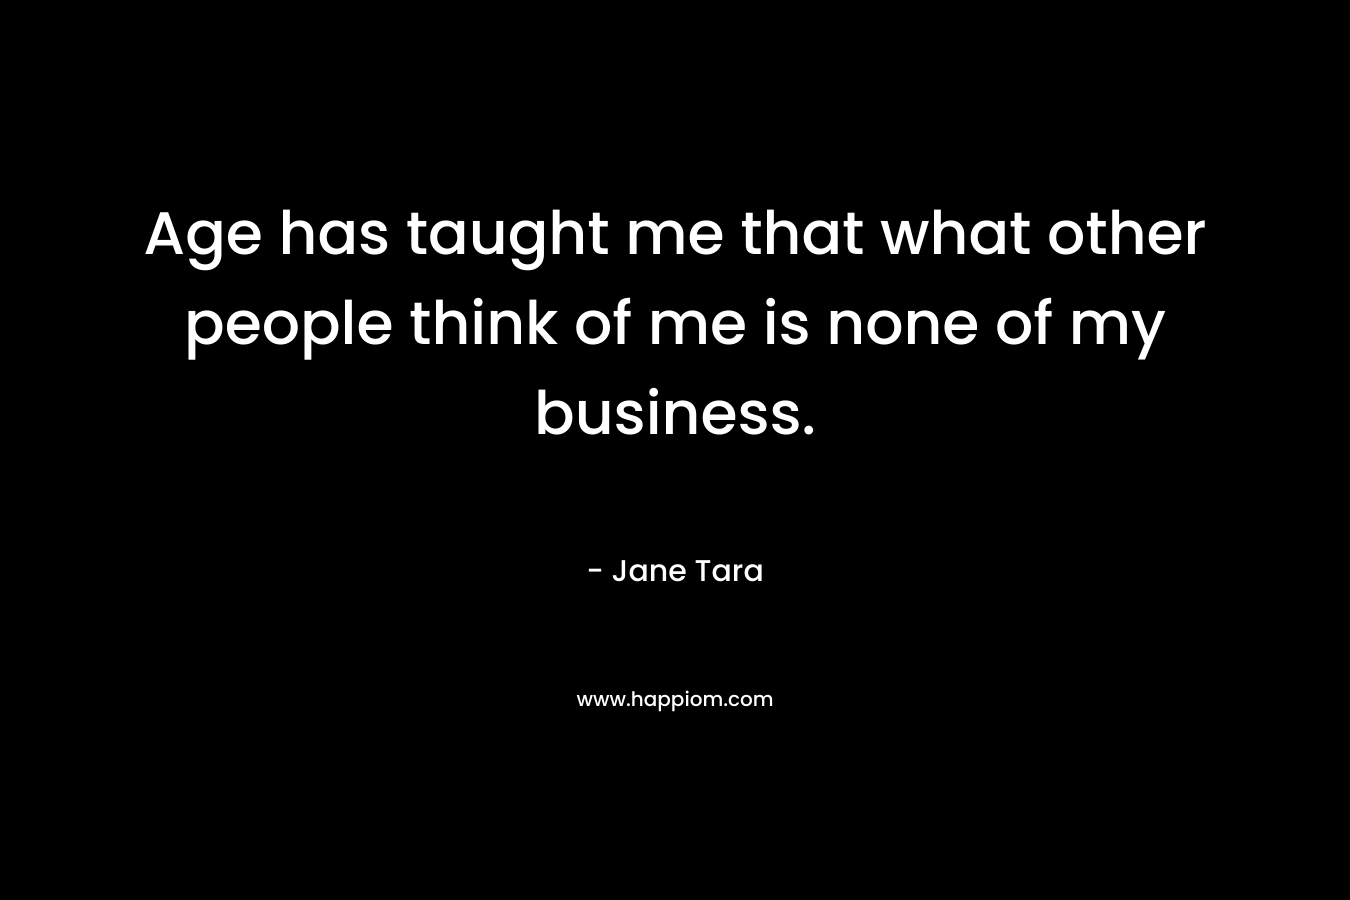 Age has taught me that what other people think of me is none of my business. – Jane Tara